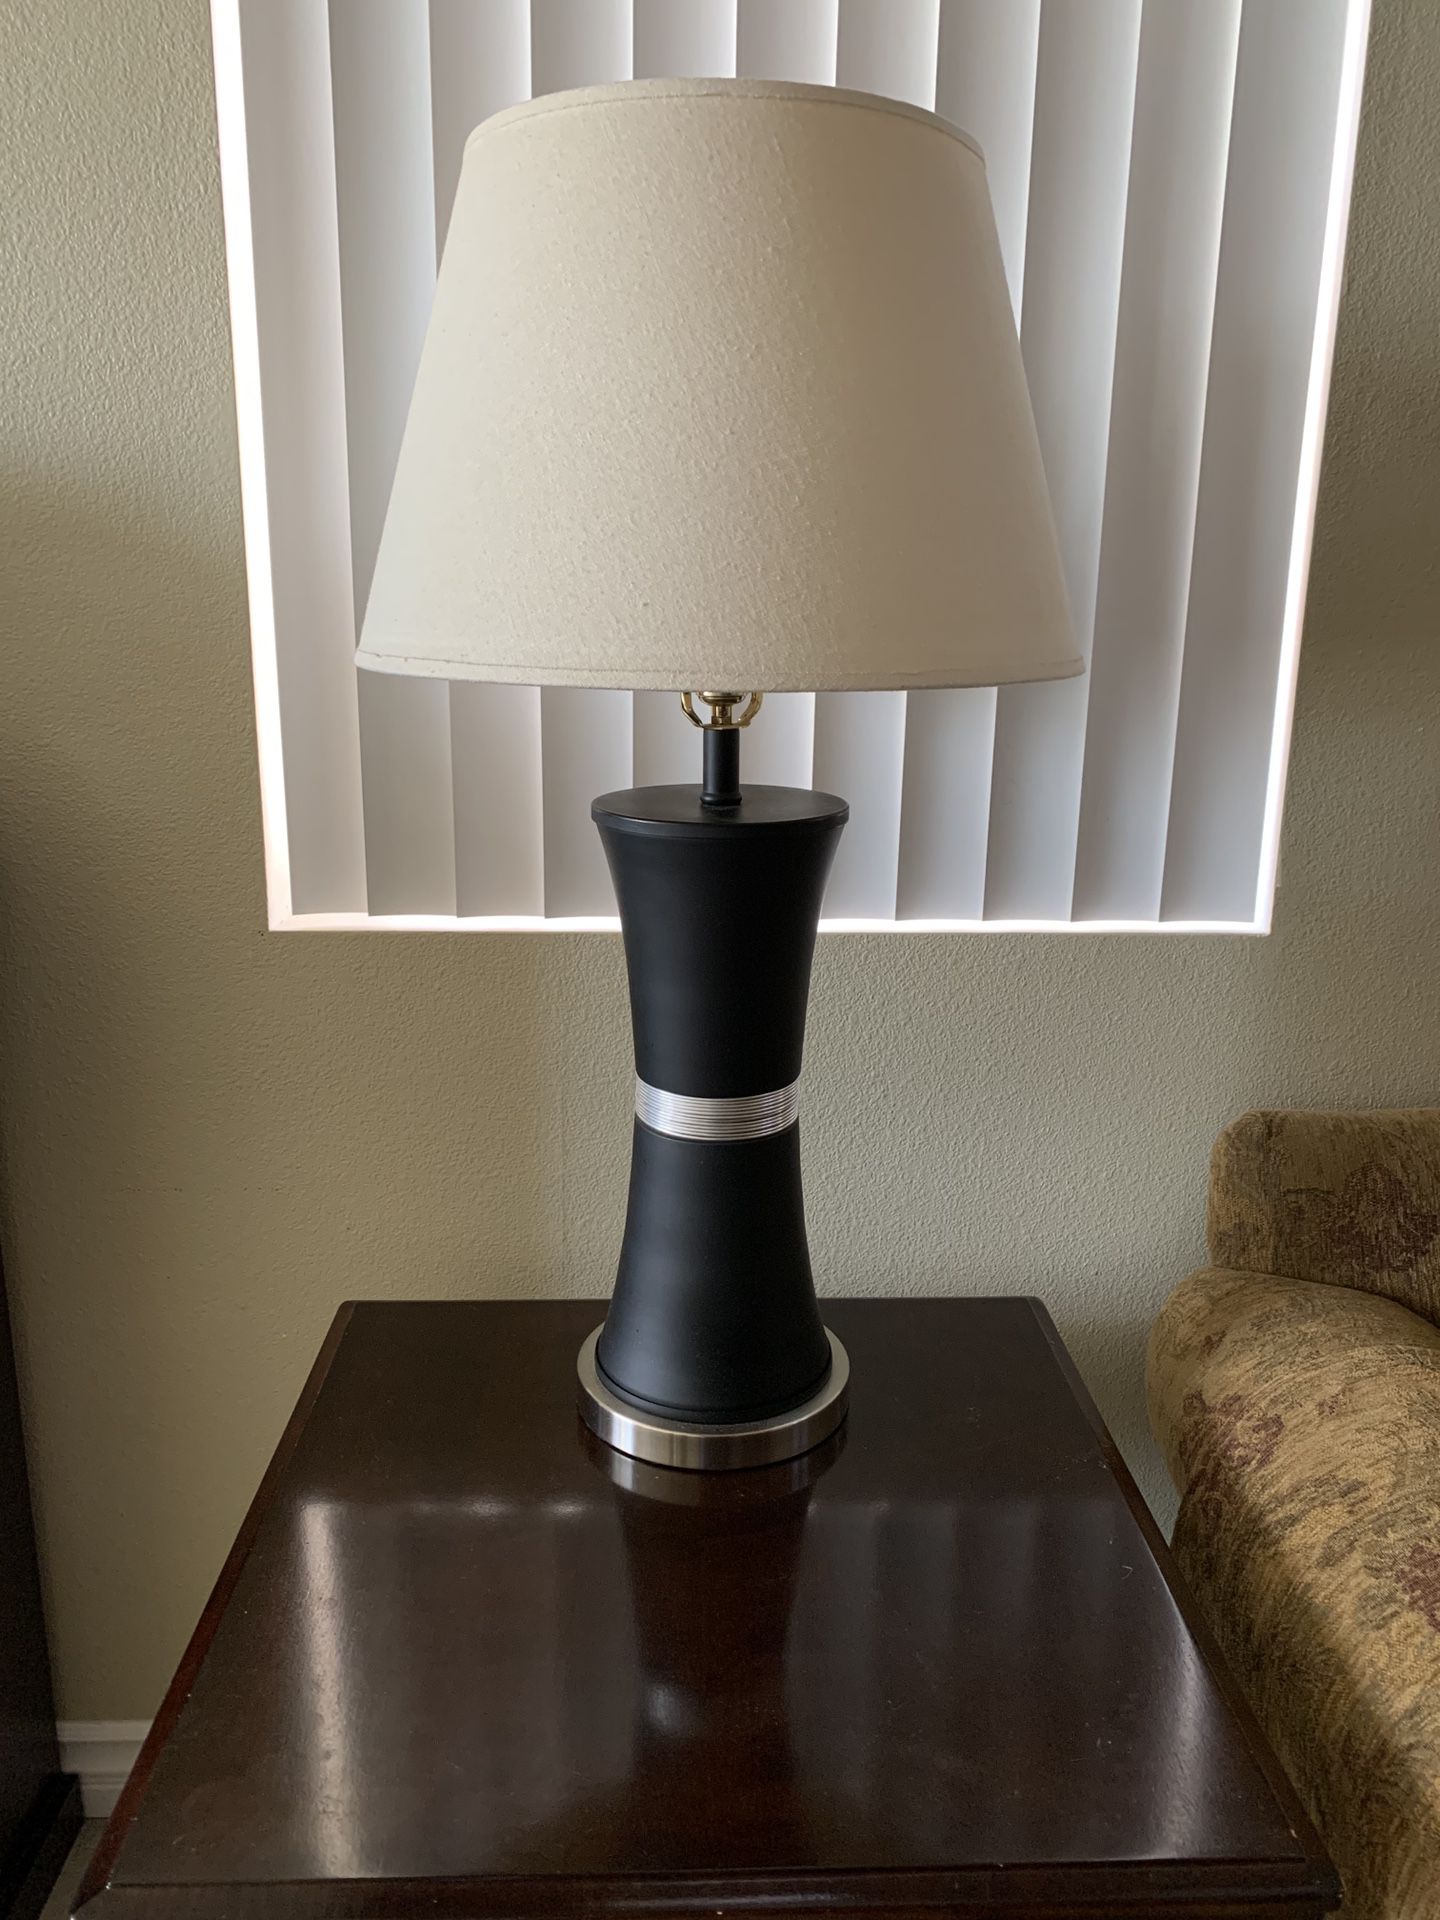 2 Tabletop Lamps Black and Silver 33” Tall